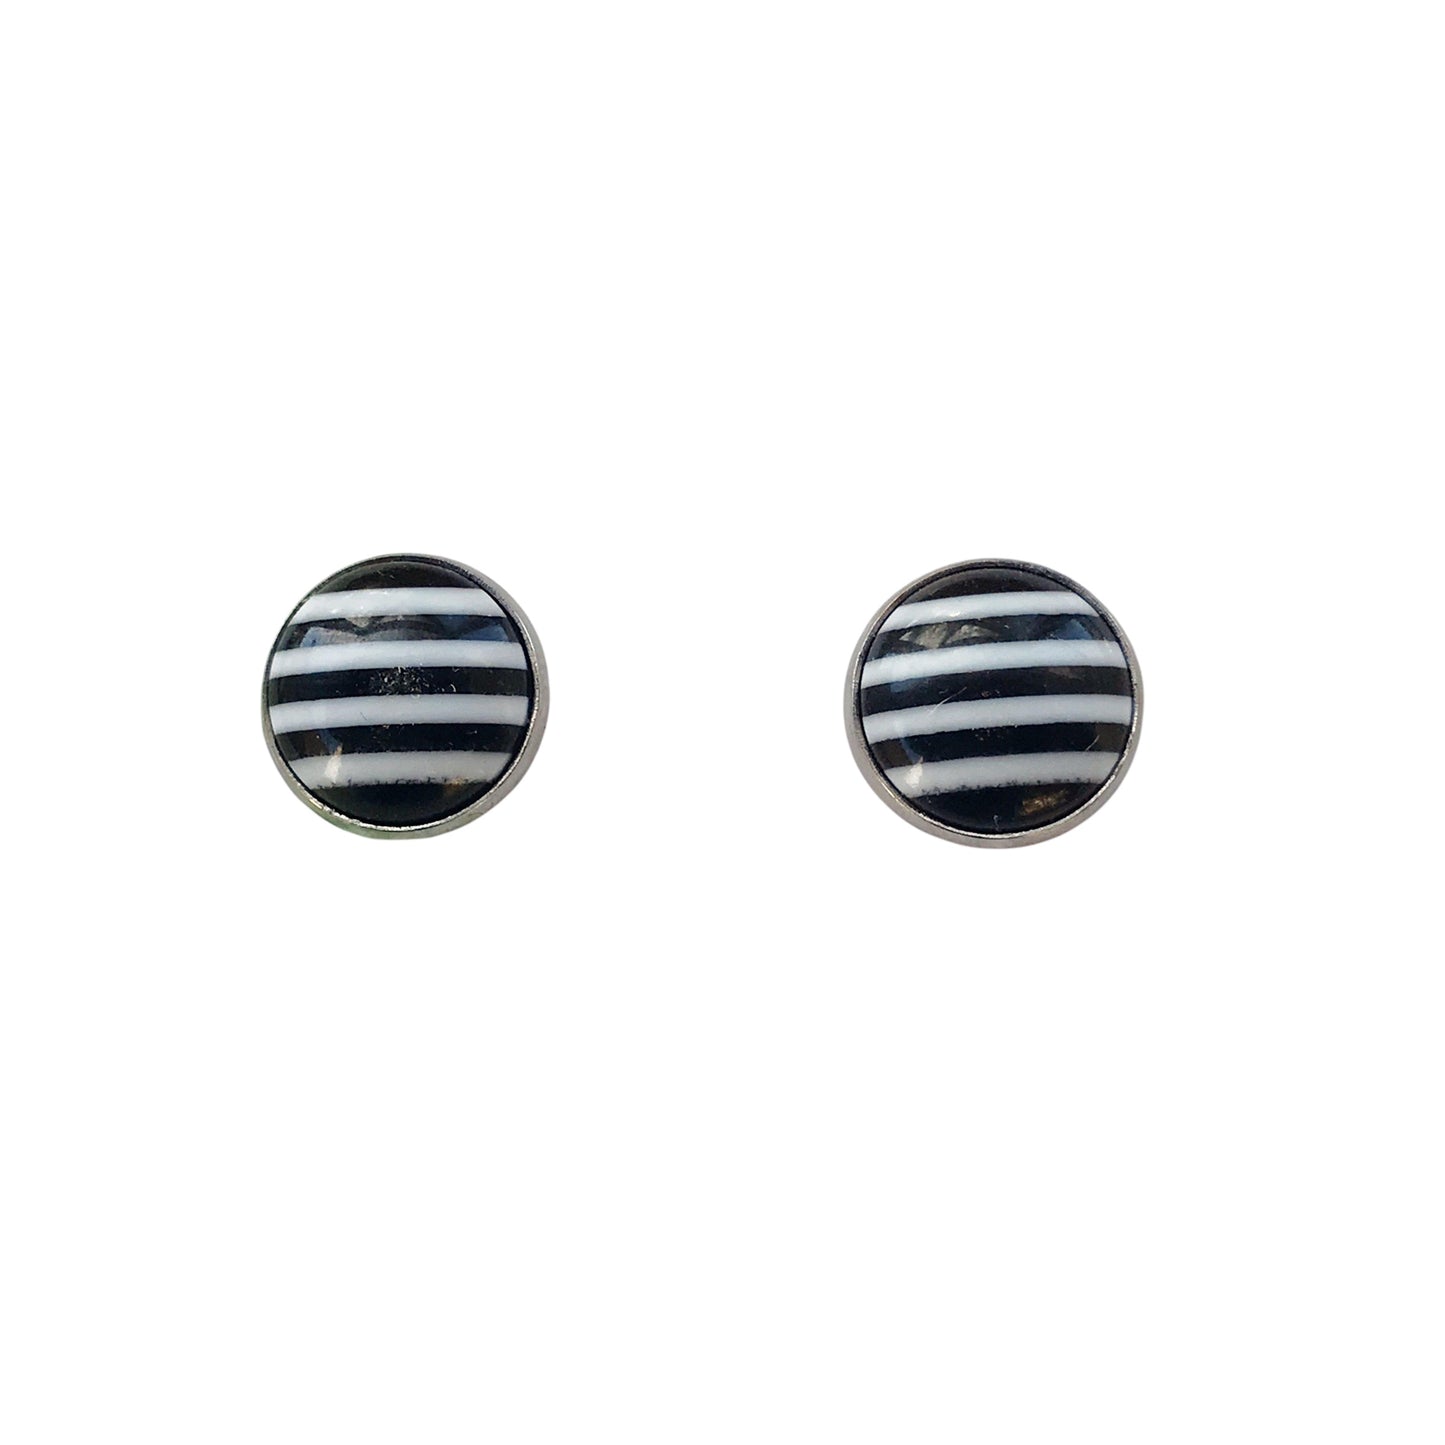 Black & White Striped Stud Earrings - Classic & Chic Accessories